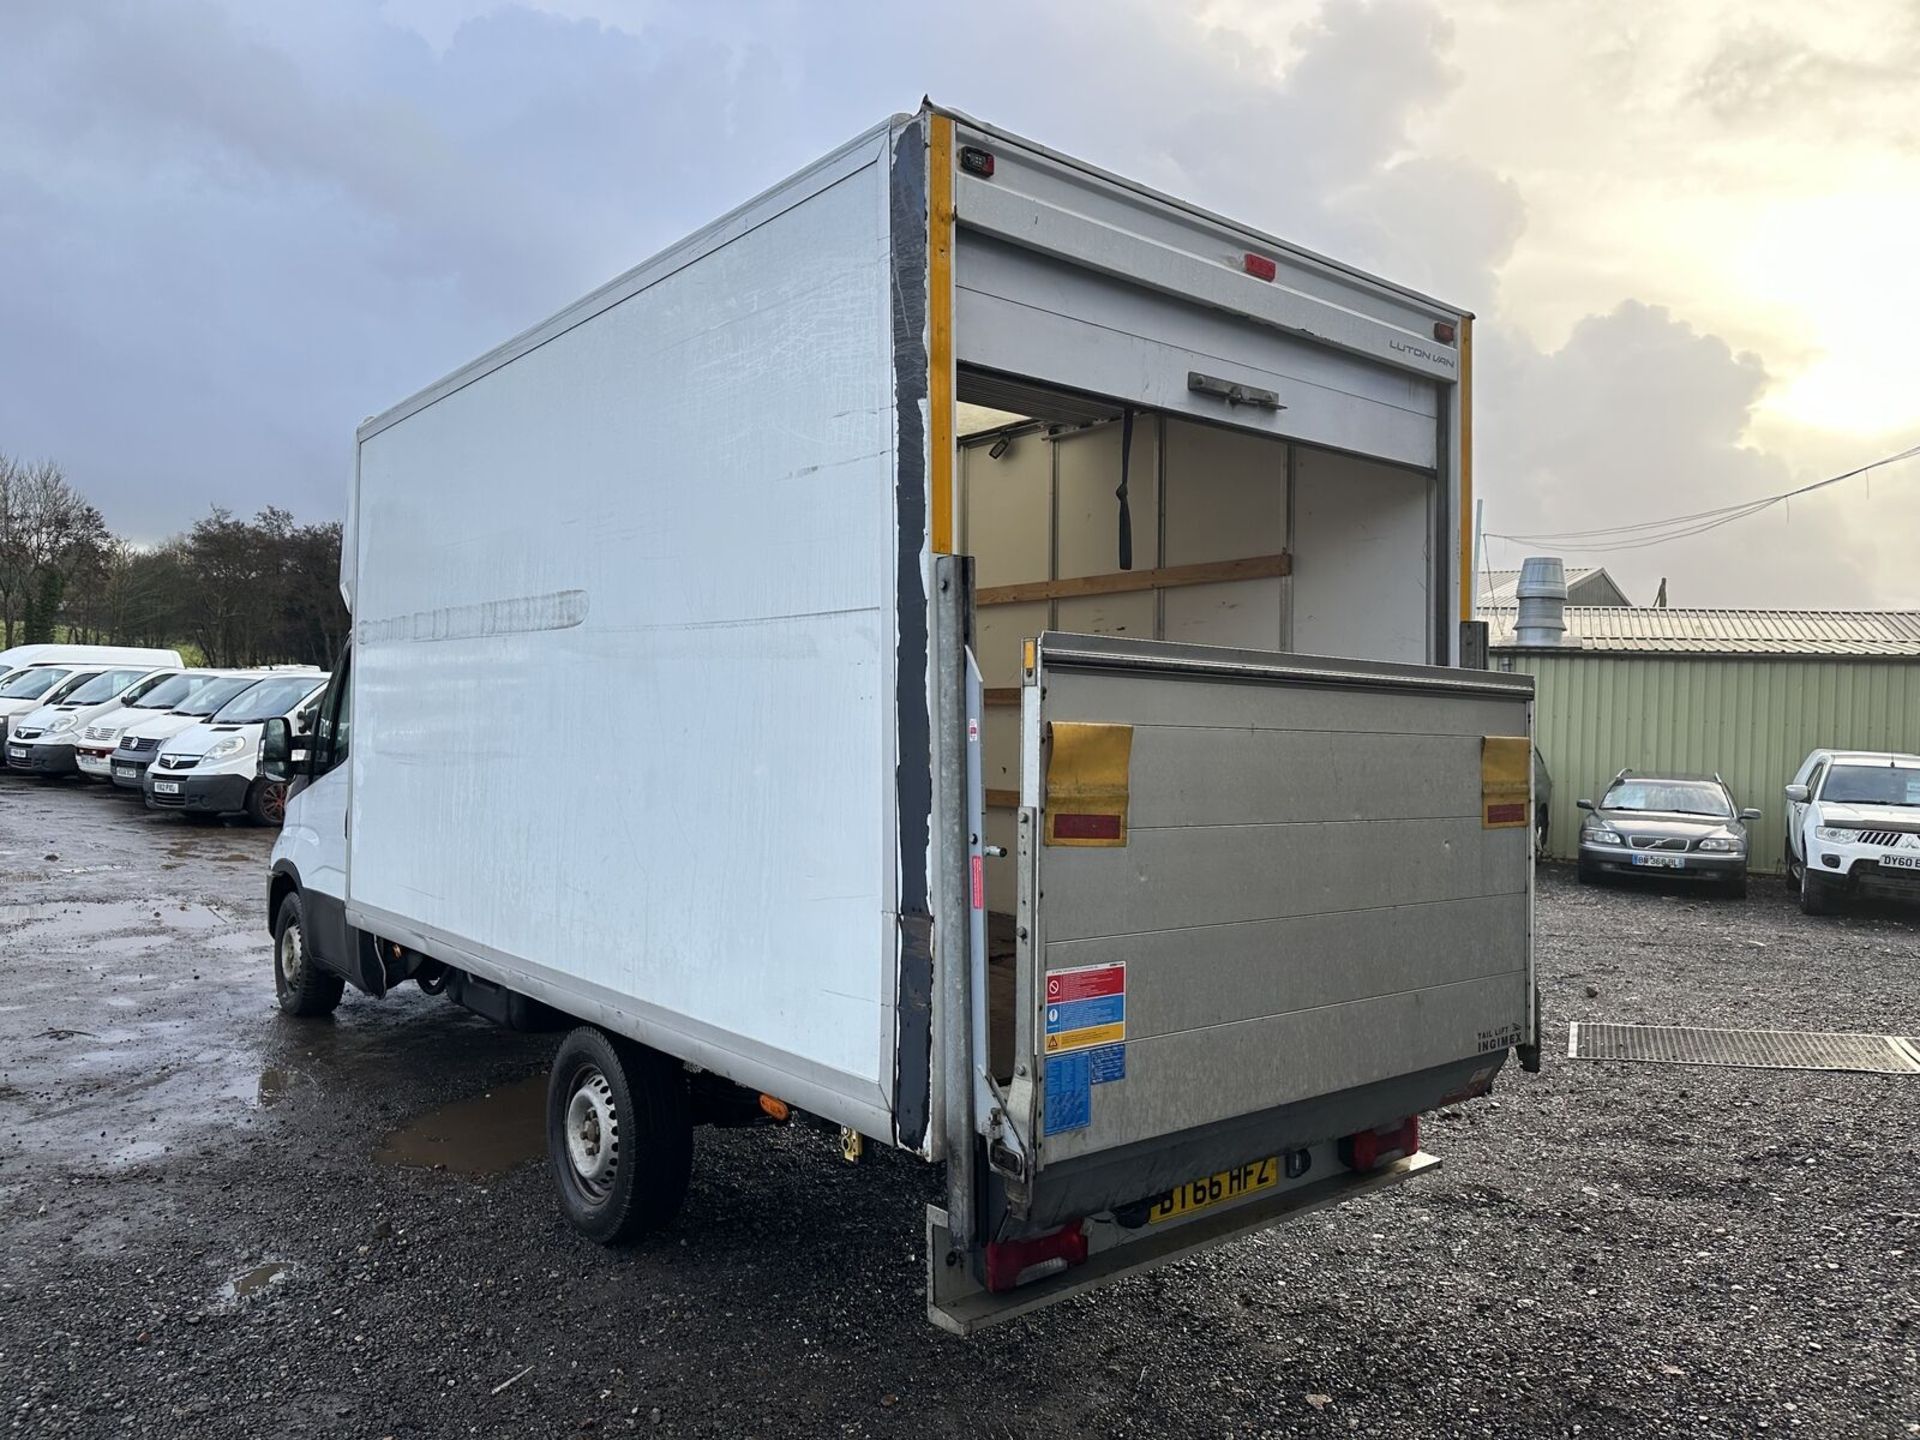 MECHANICAL NOTICE: 66 PLATE IVECO DAILY, GEARBOX WARNING - NO VAT ON HAMMER - Image 11 of 15